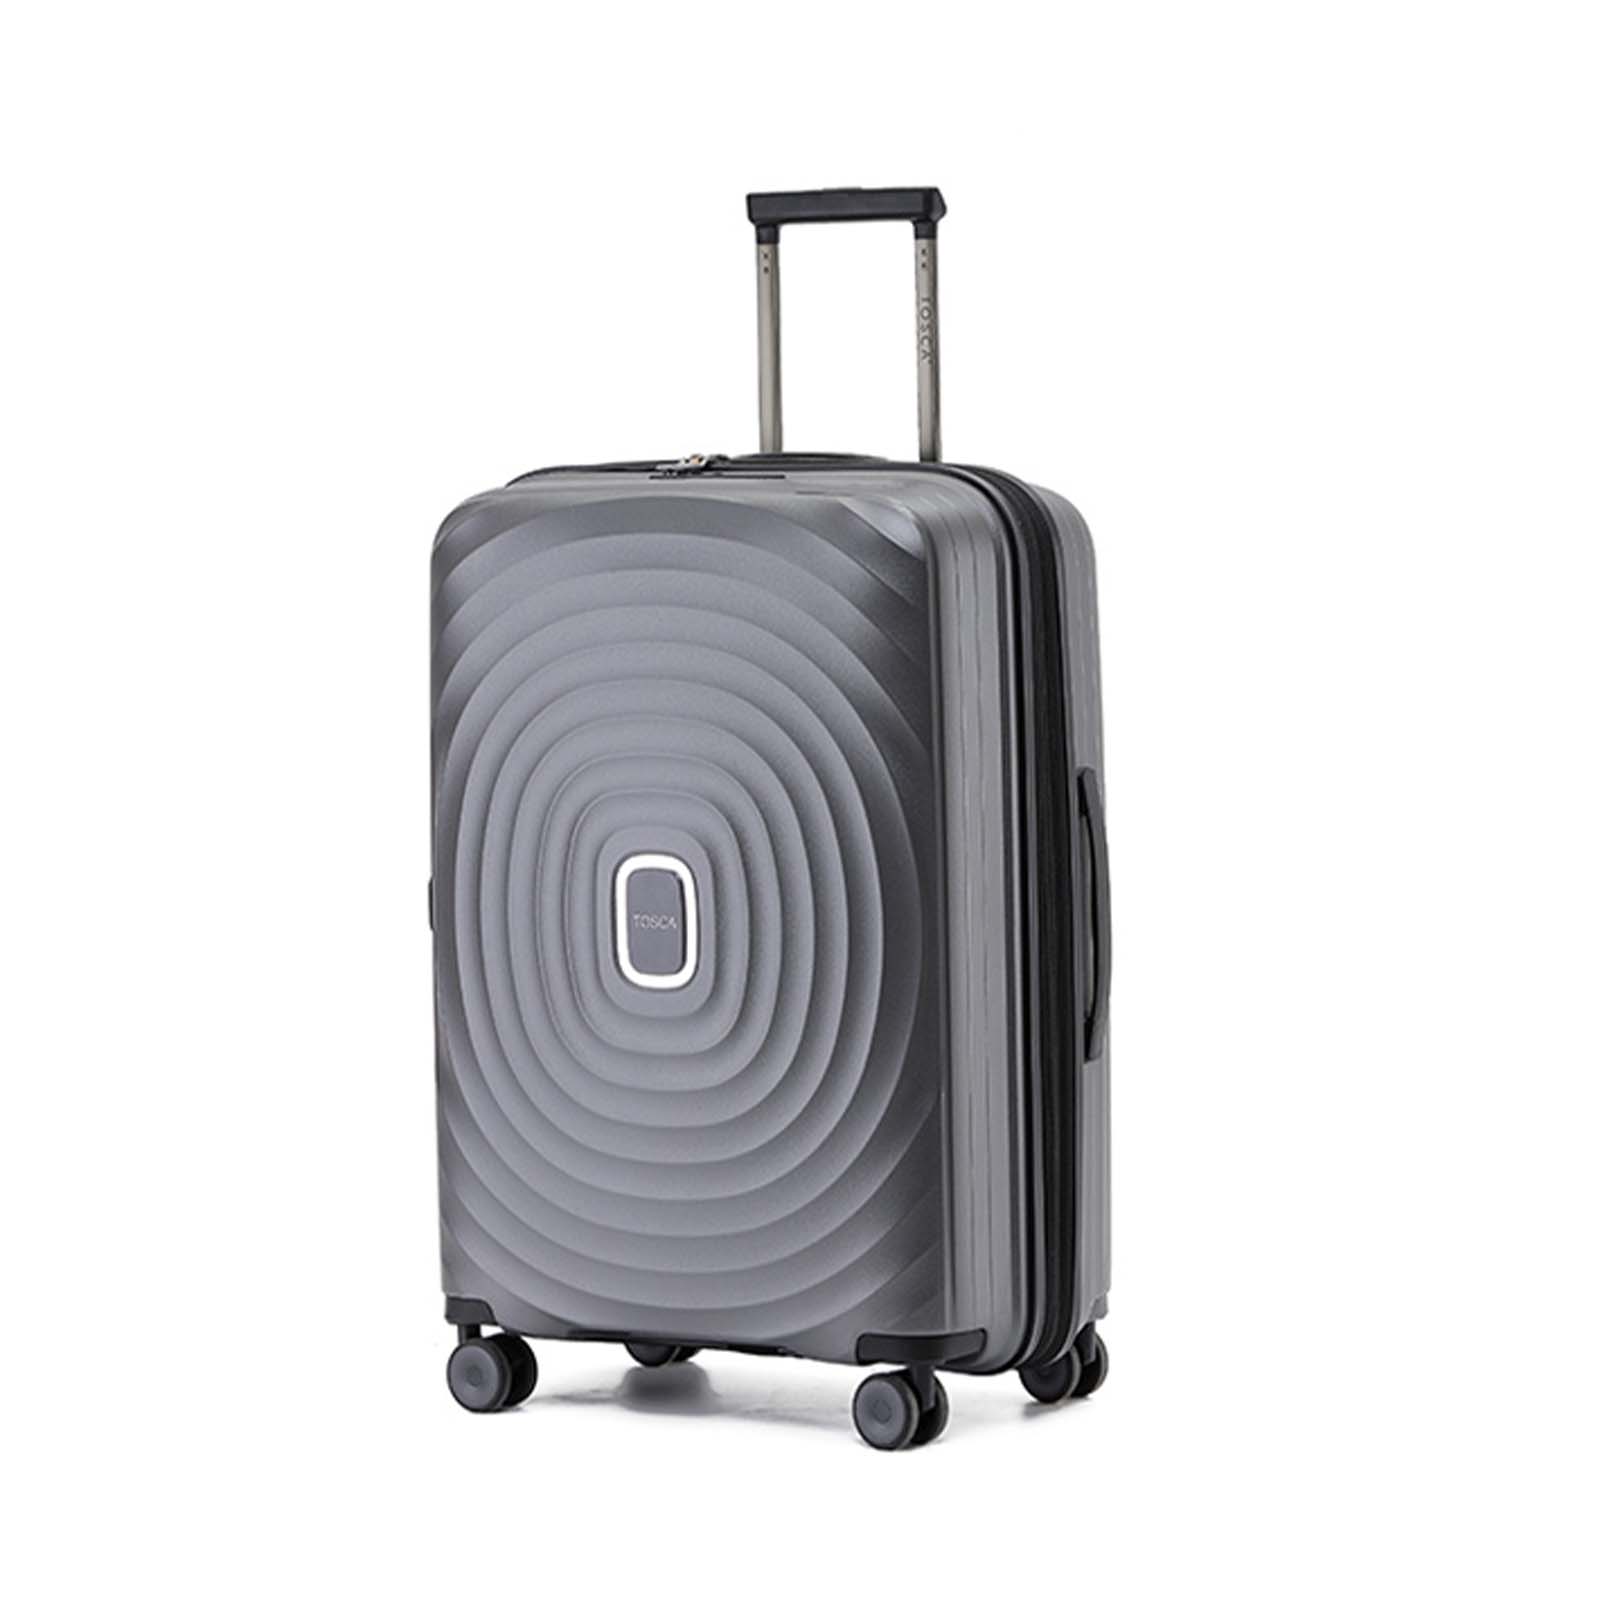 tosca-eclipse-4-wheel-67cm-carry-on-suitcase-charcoal-front-angle